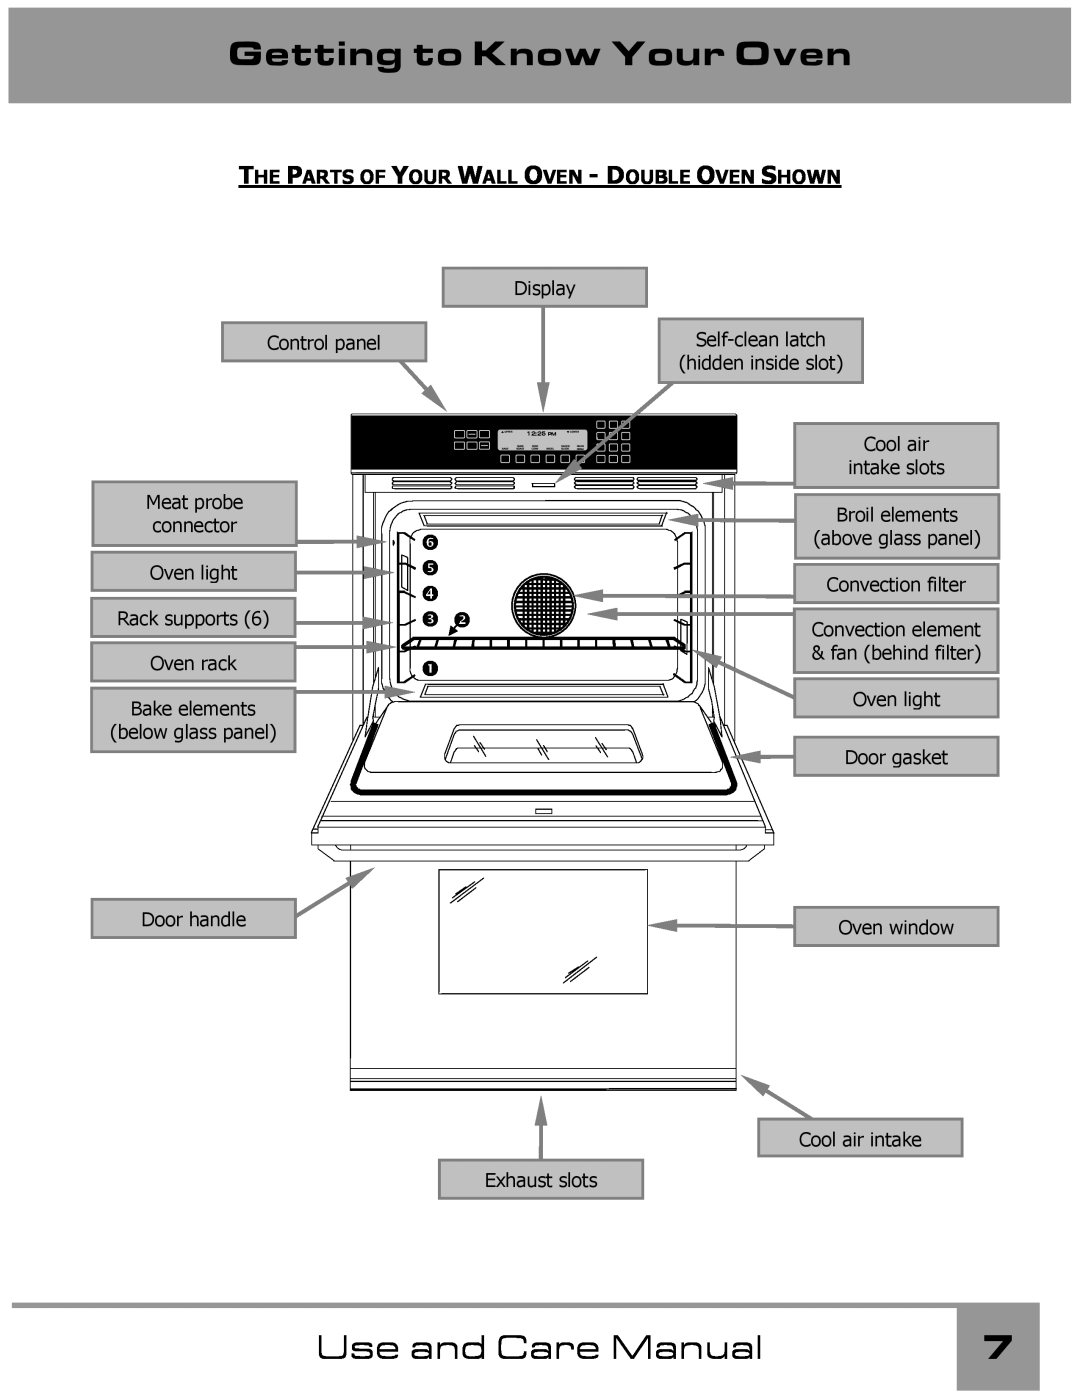 Dacor manual The Parts Of Your Wall Oven - Double Oven Shown, Getting to Know Your Oven, Use and Care Manual 